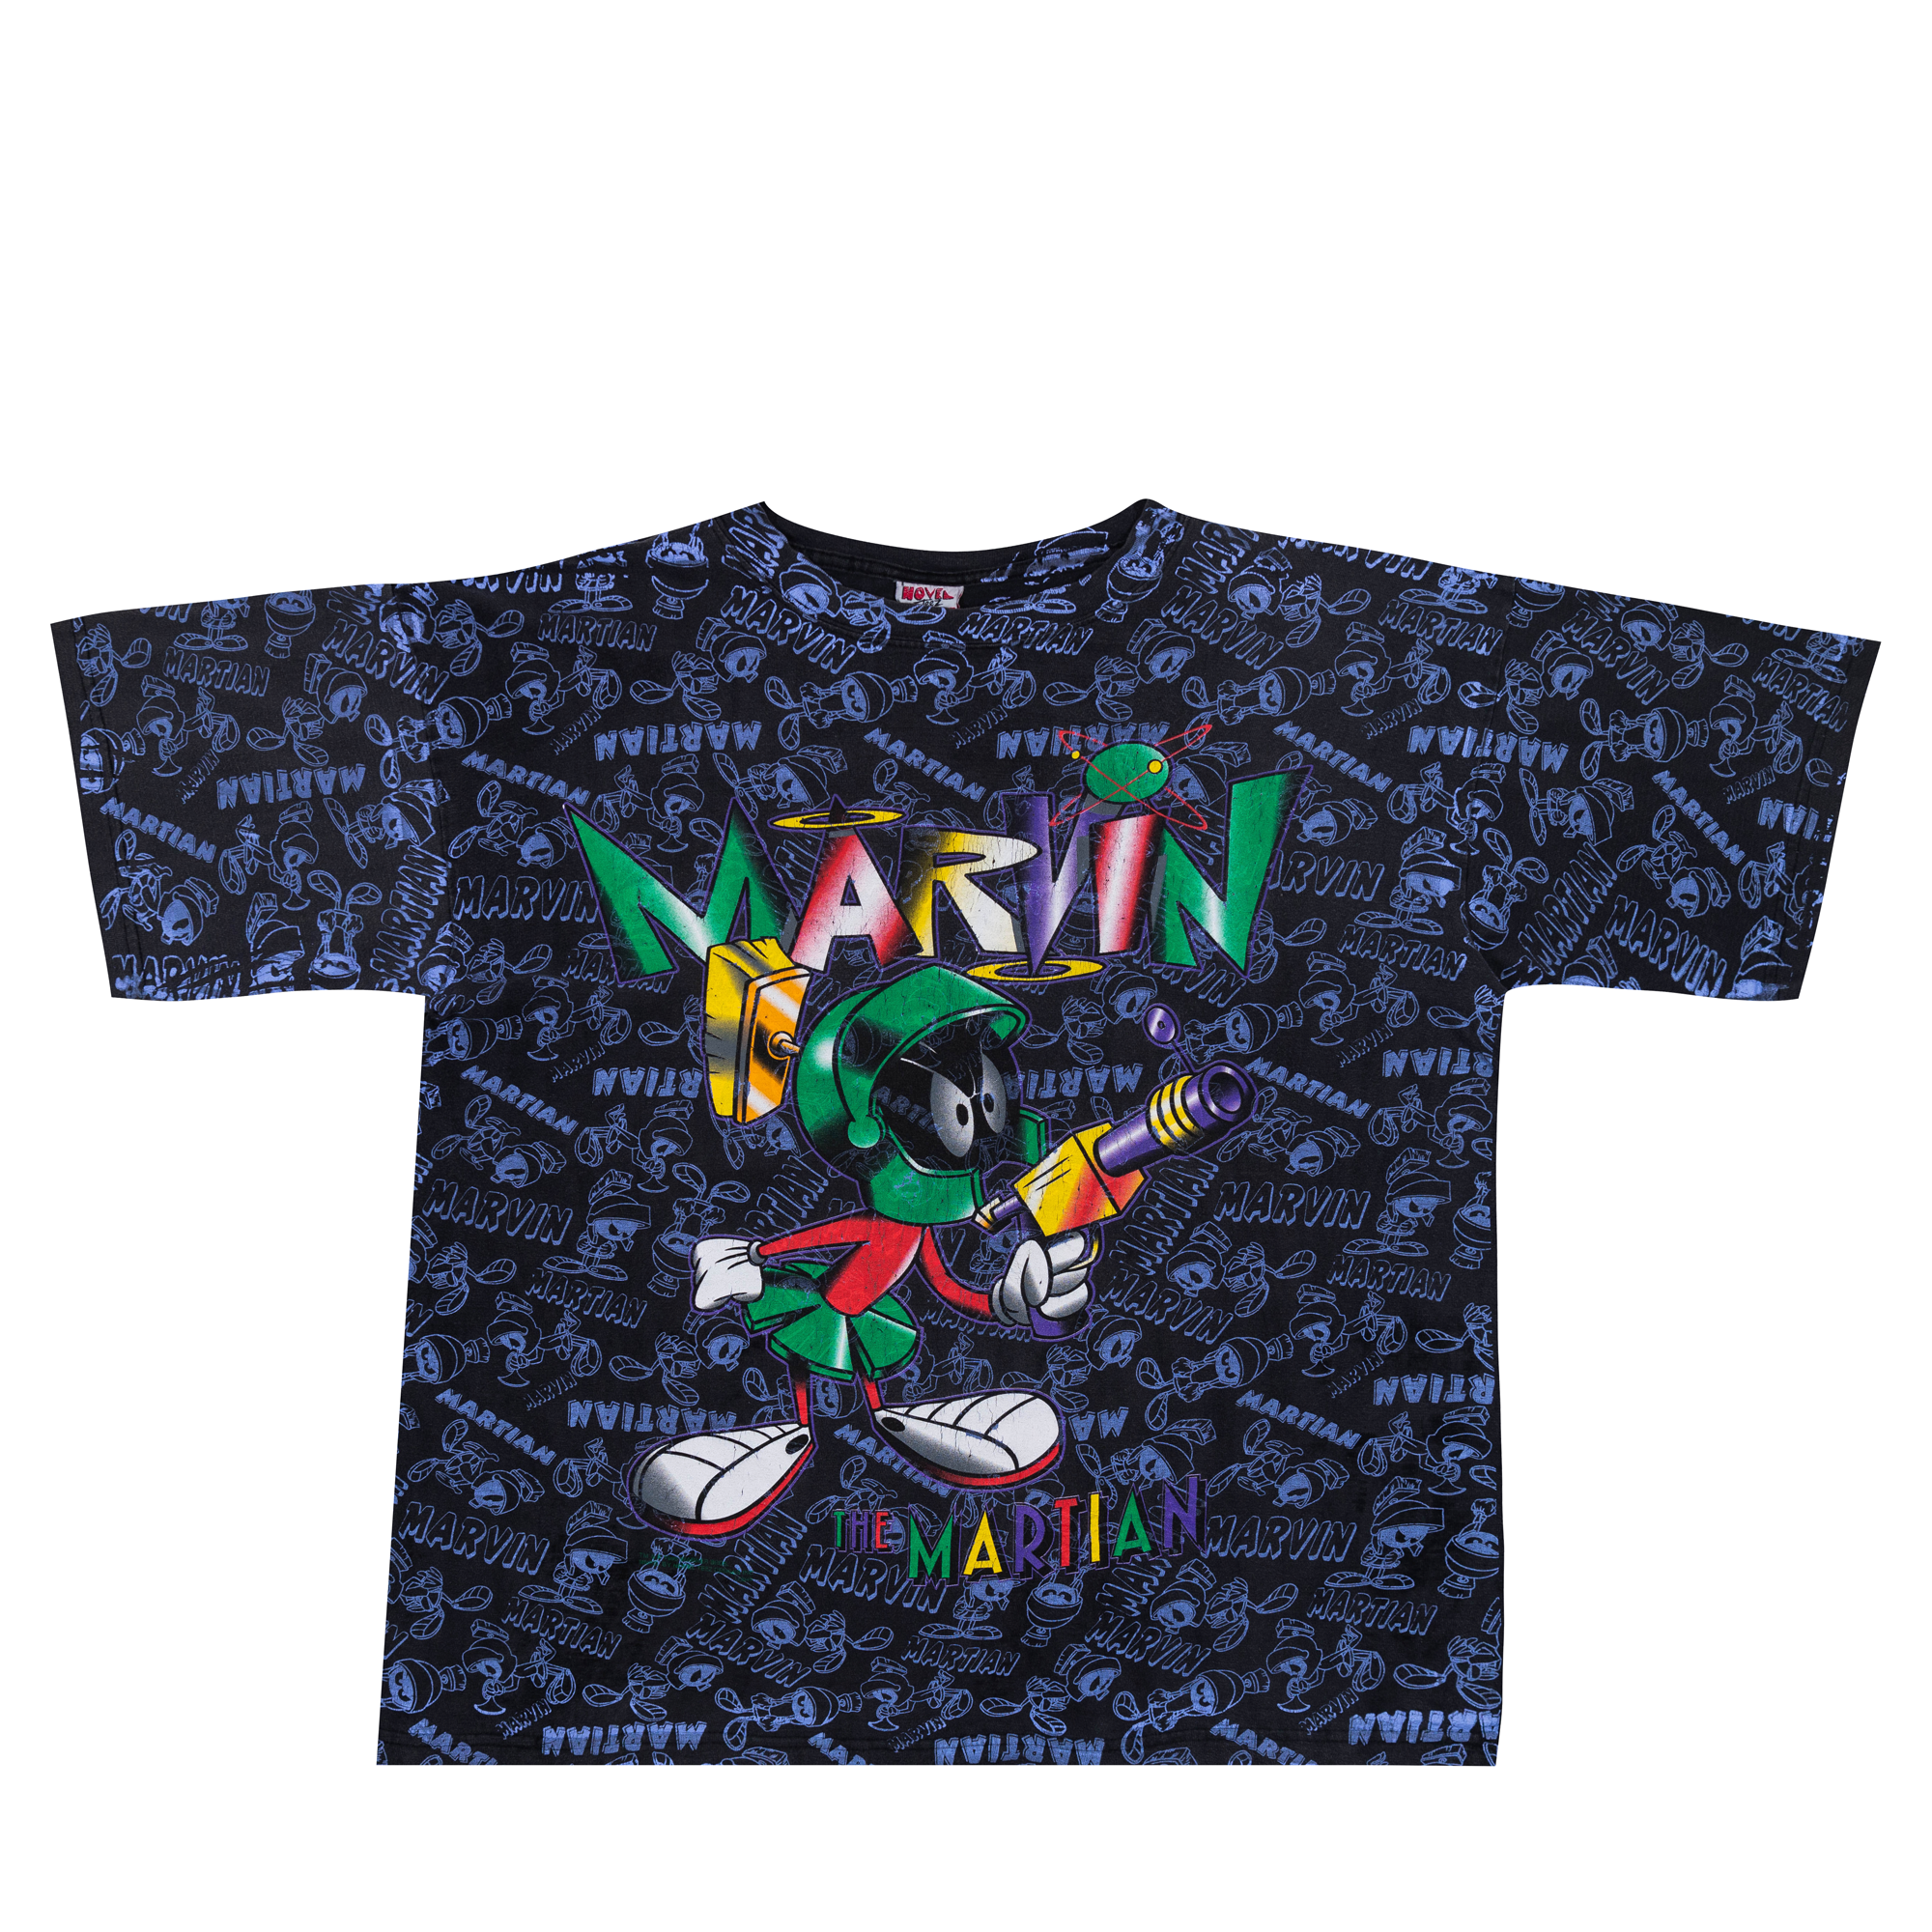 Marvin The Martian All Over Front Print 1995 Warner Bros Tee Black-PLUS